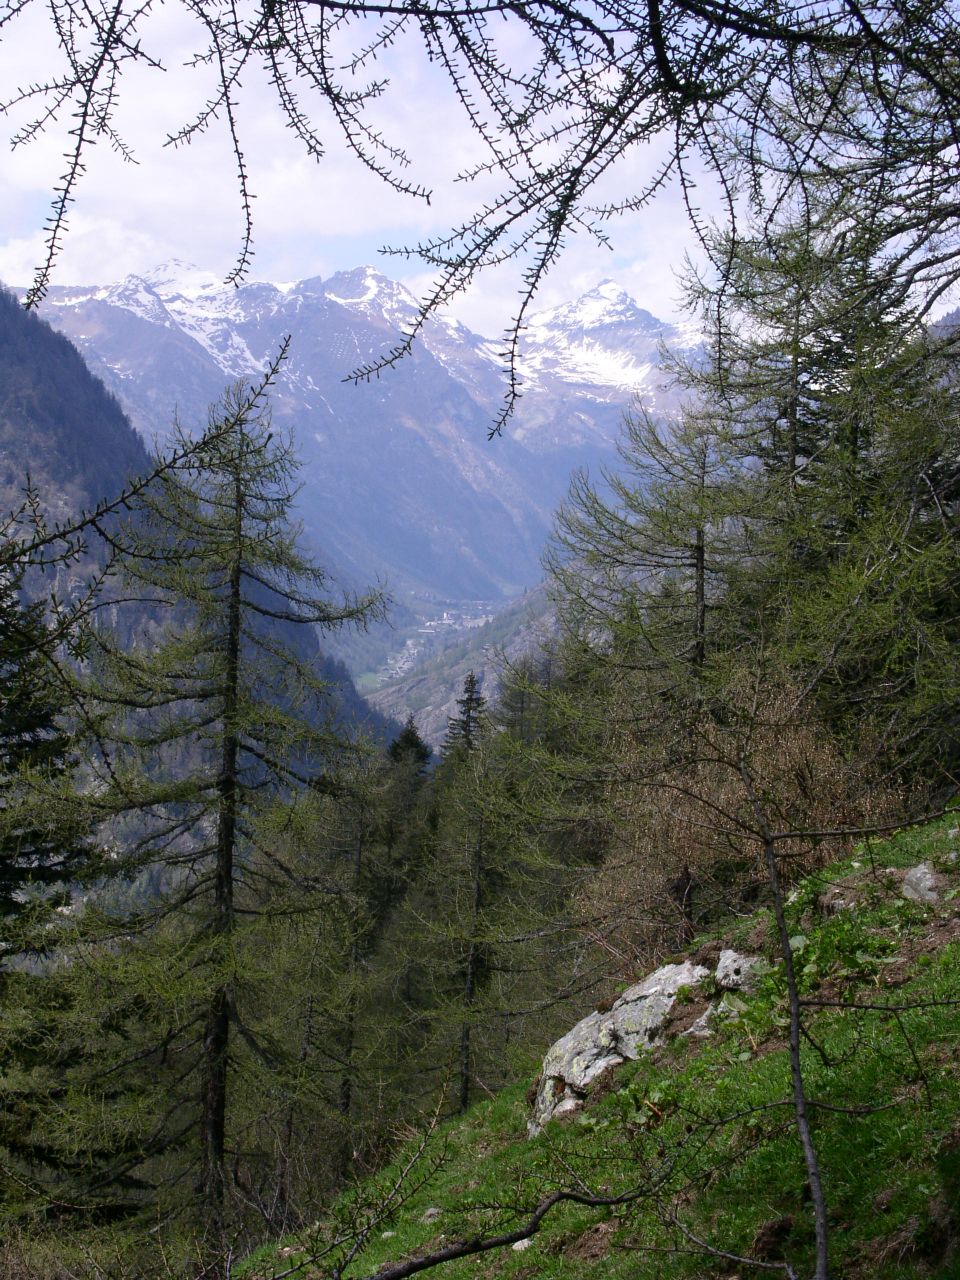 A view of Gressoney